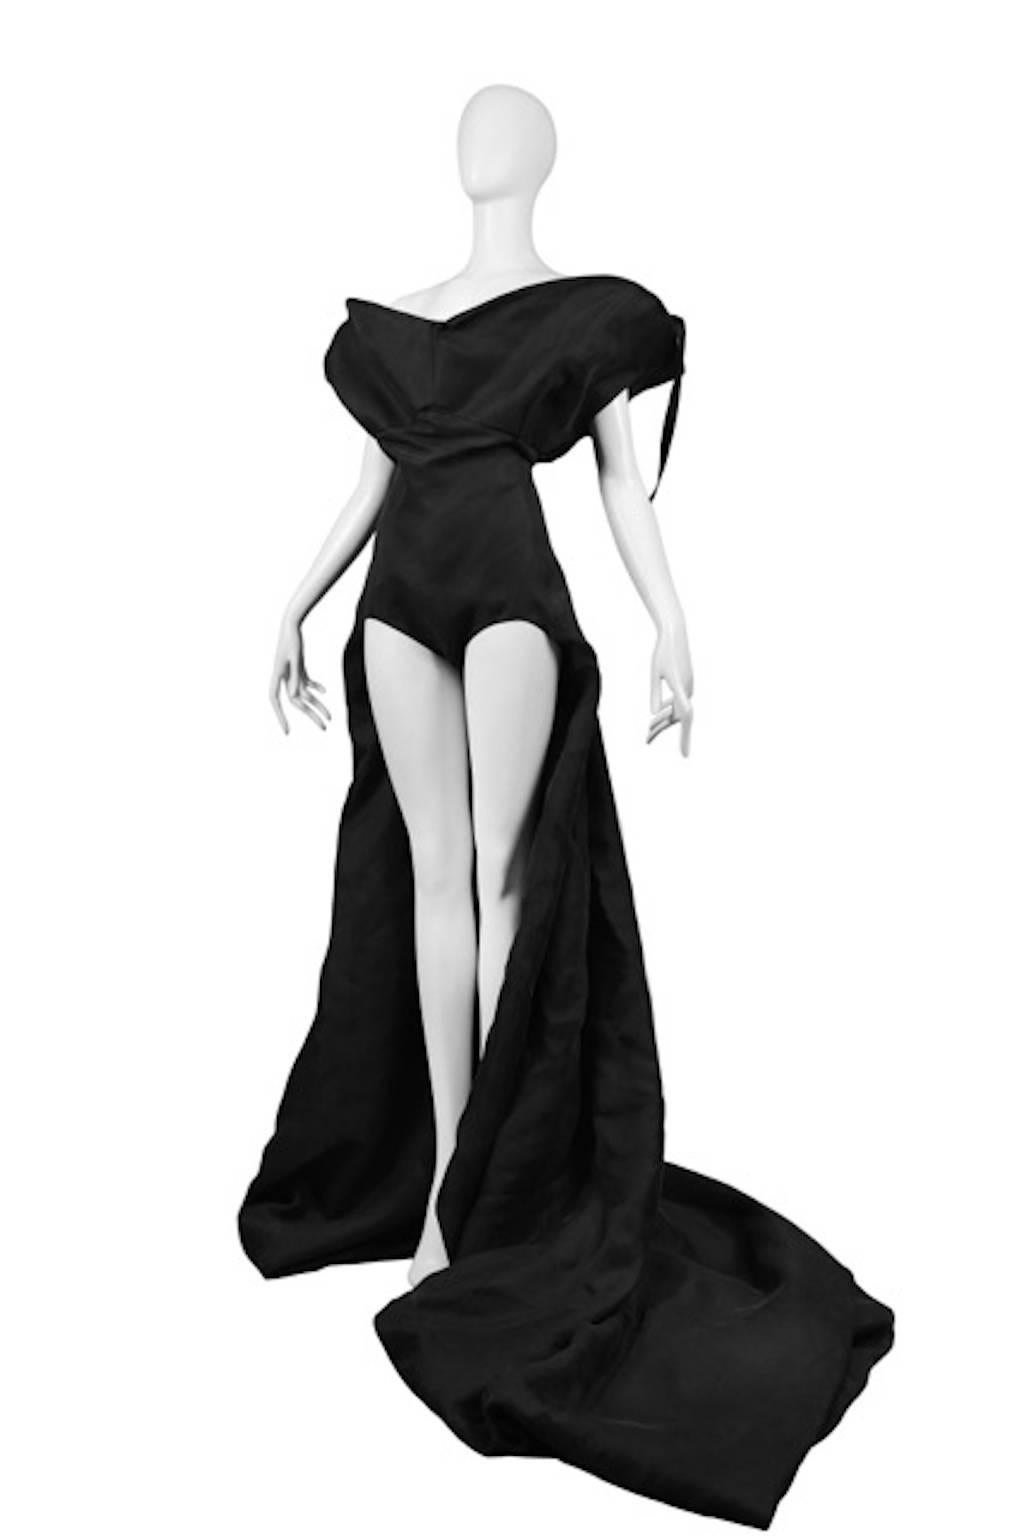 Vintage Maison Martin Margiela Couture Artisanal Black Architectural Gown. Runway piece from the Spring / Summer 2009 Collection.